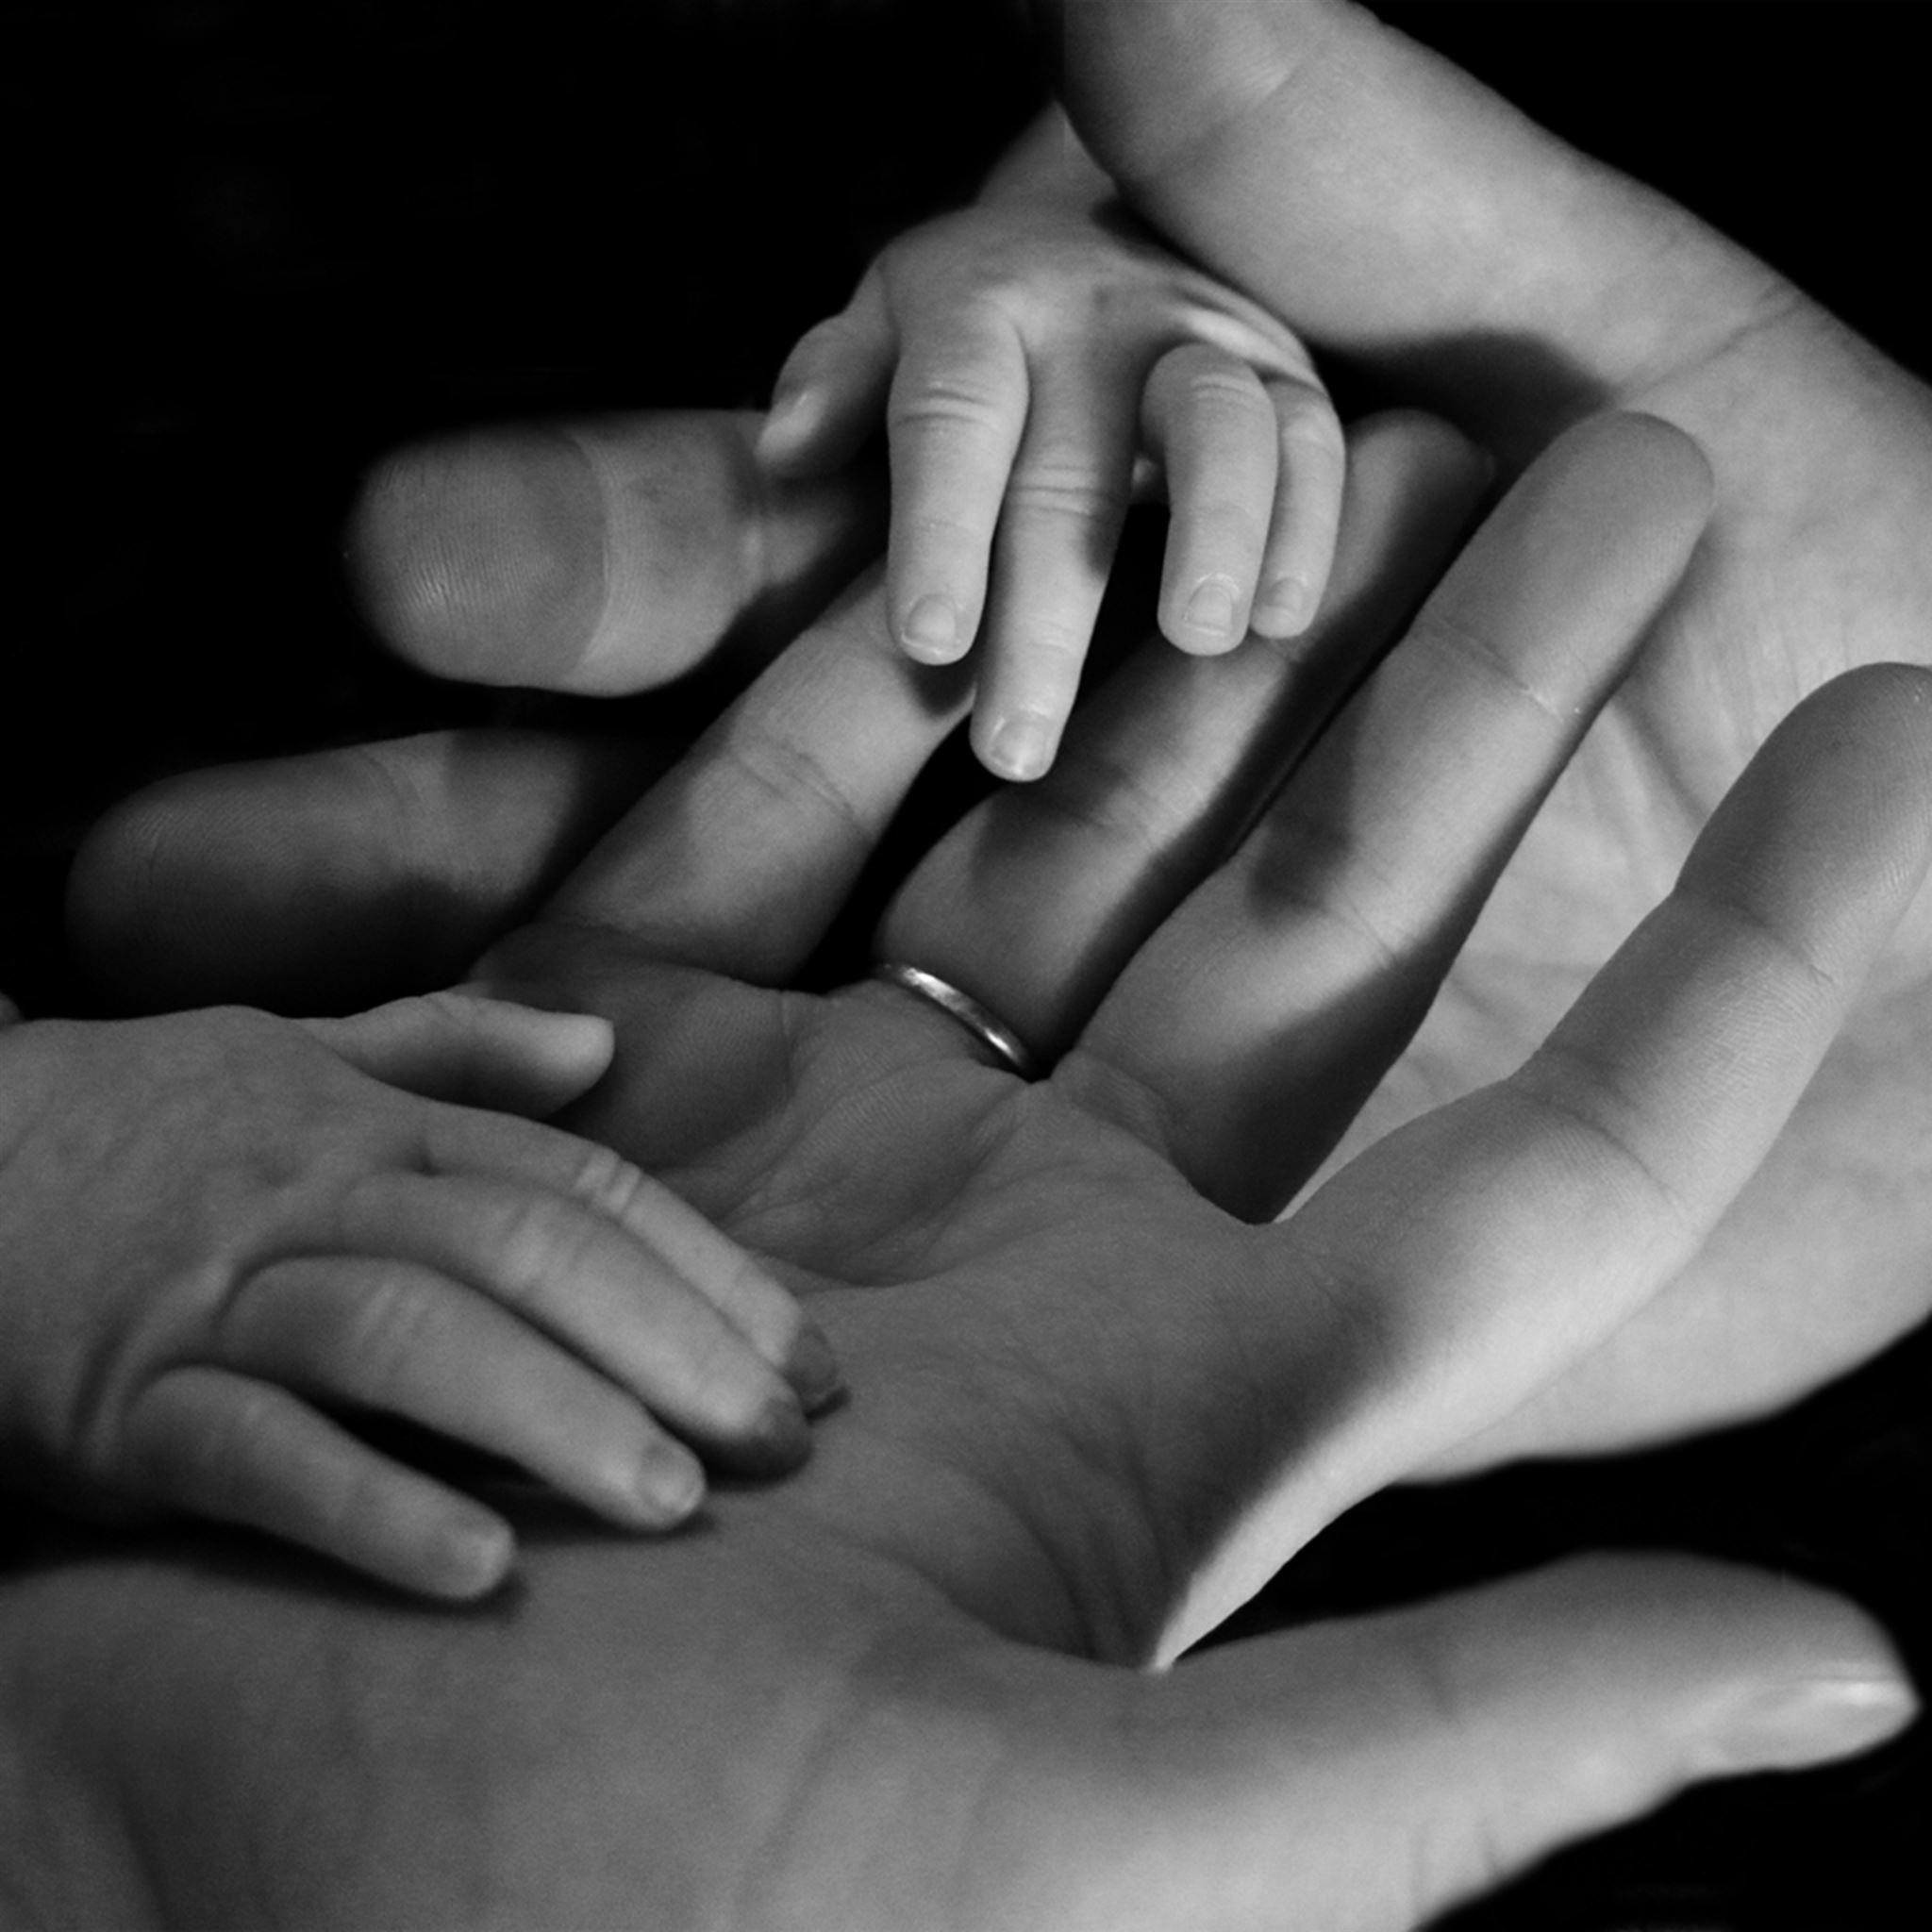 A black and white photo of two hands holding baby fingers - 